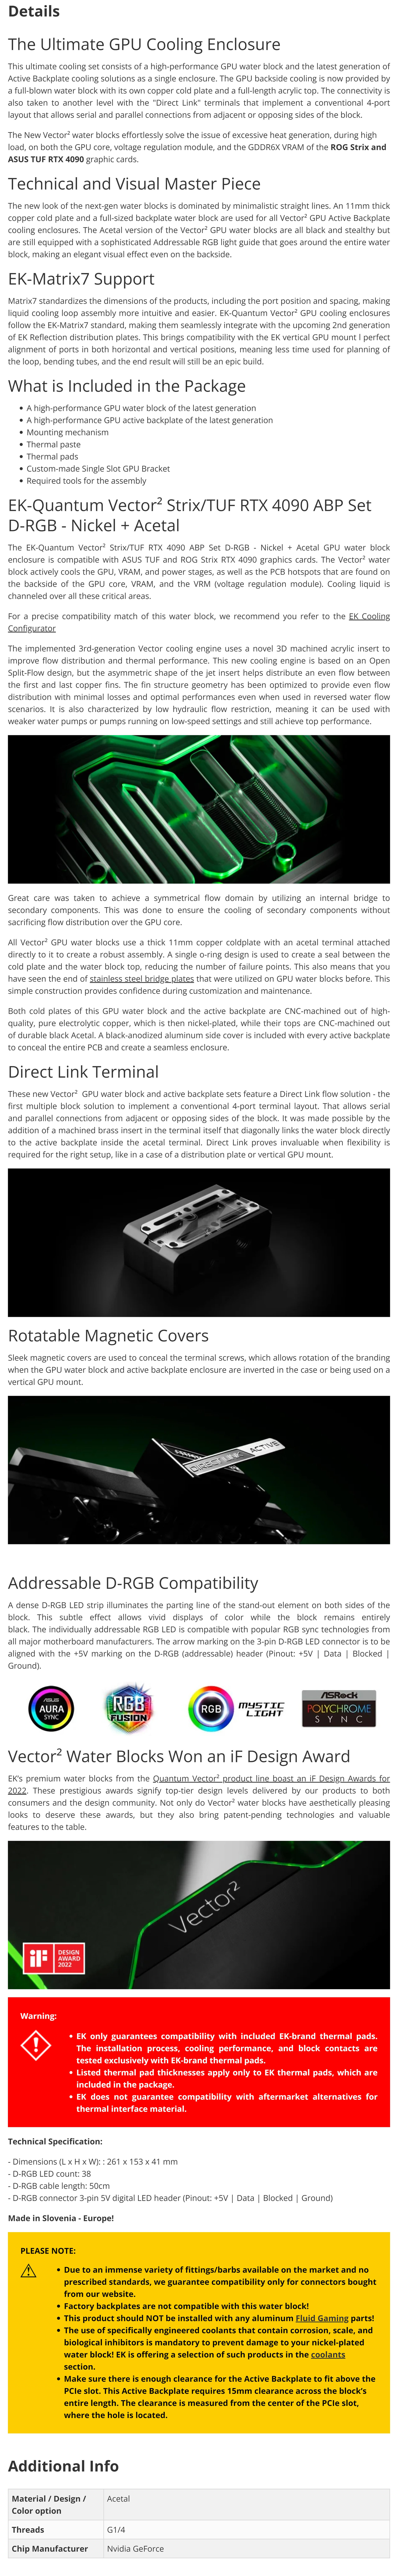 A large marketing image providing additional information about the product EK Quantum Vector2 Strix/TUF RTX 4090 D-RGB ABP Set - Nickel + Acetal - Additional alt info not provided